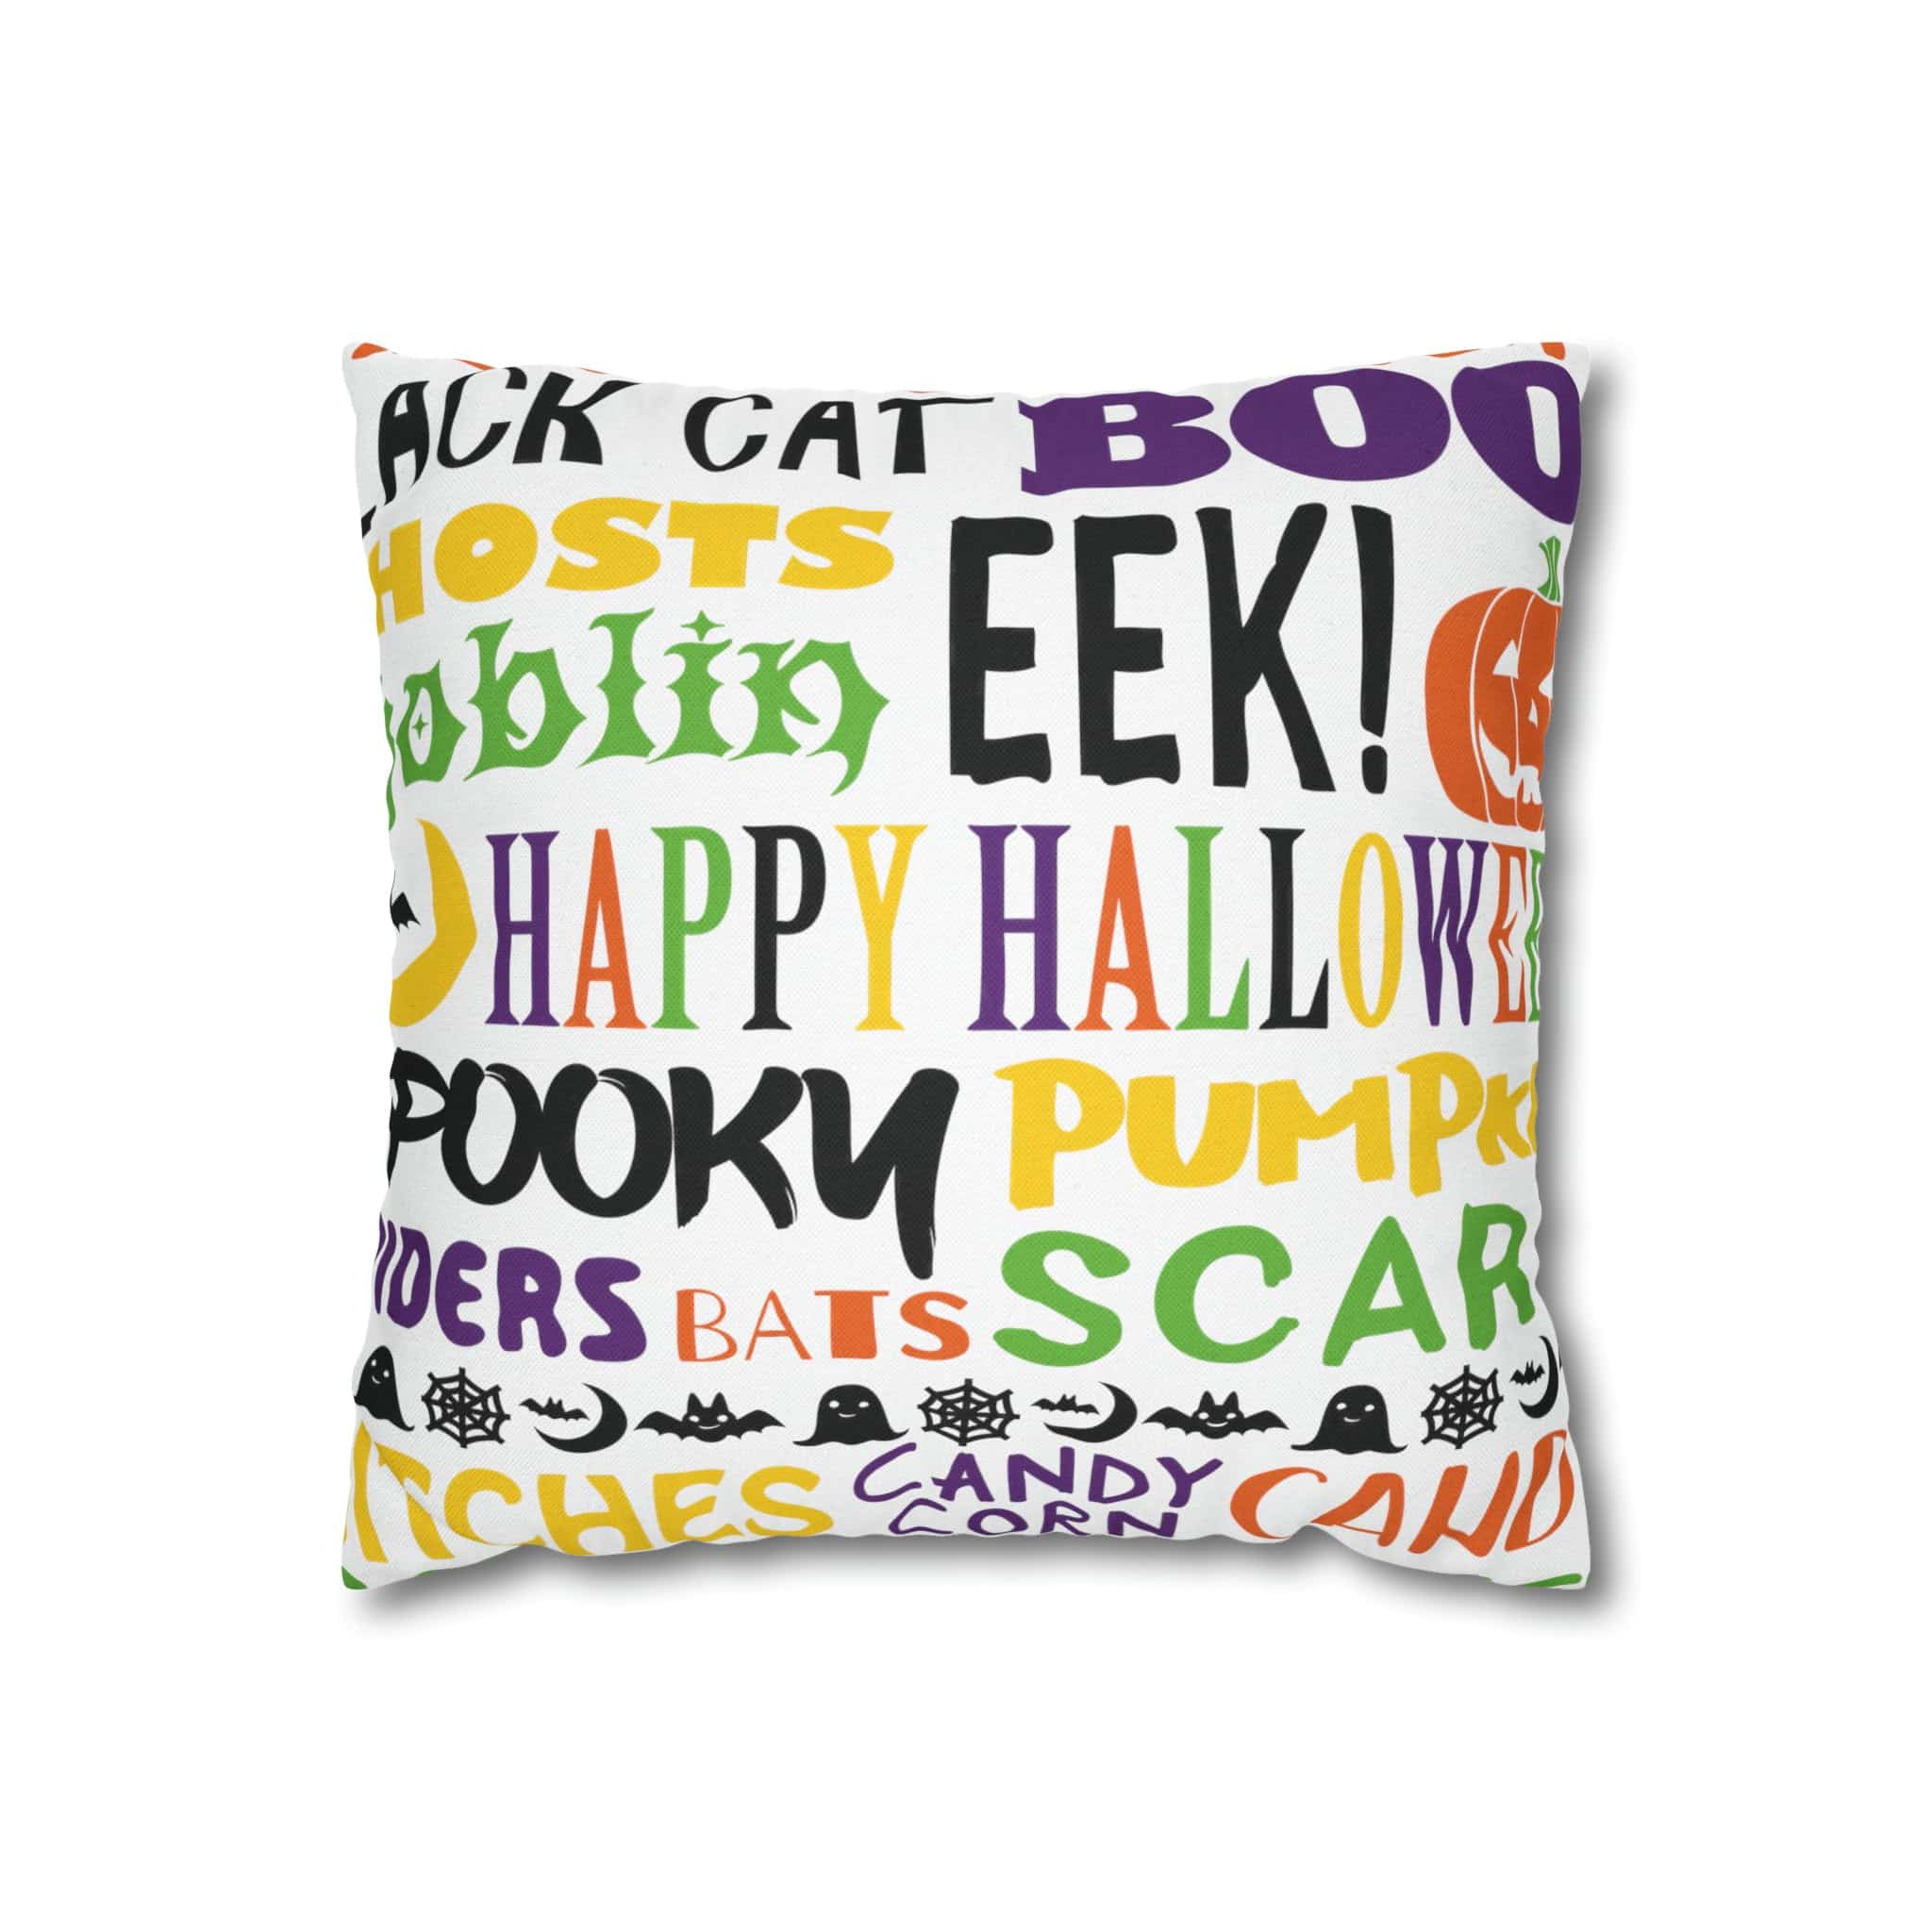 Kate McEnroe New York Halloween Throw Pillow Cover, Trick or Treat, Spooky Witches Haunted House Accent Pillow, Country Farmhouse Home Decor GiftThrow Pillow Covers10258149933131879776